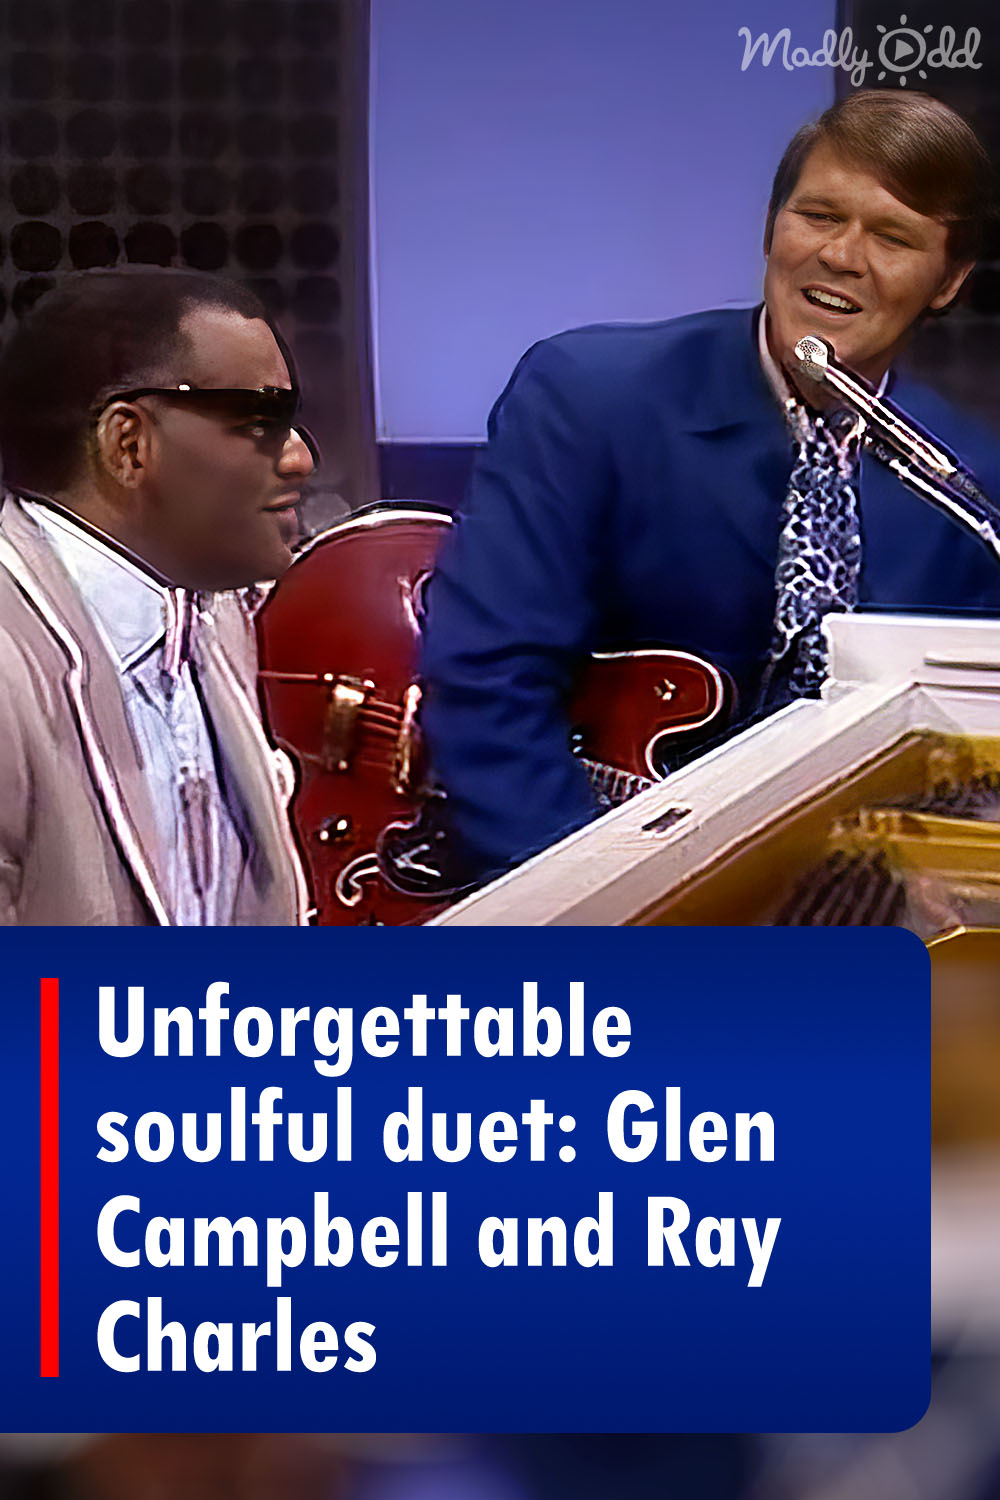 Unforgettable soulful duet: Glen Campbell and Ray Charles